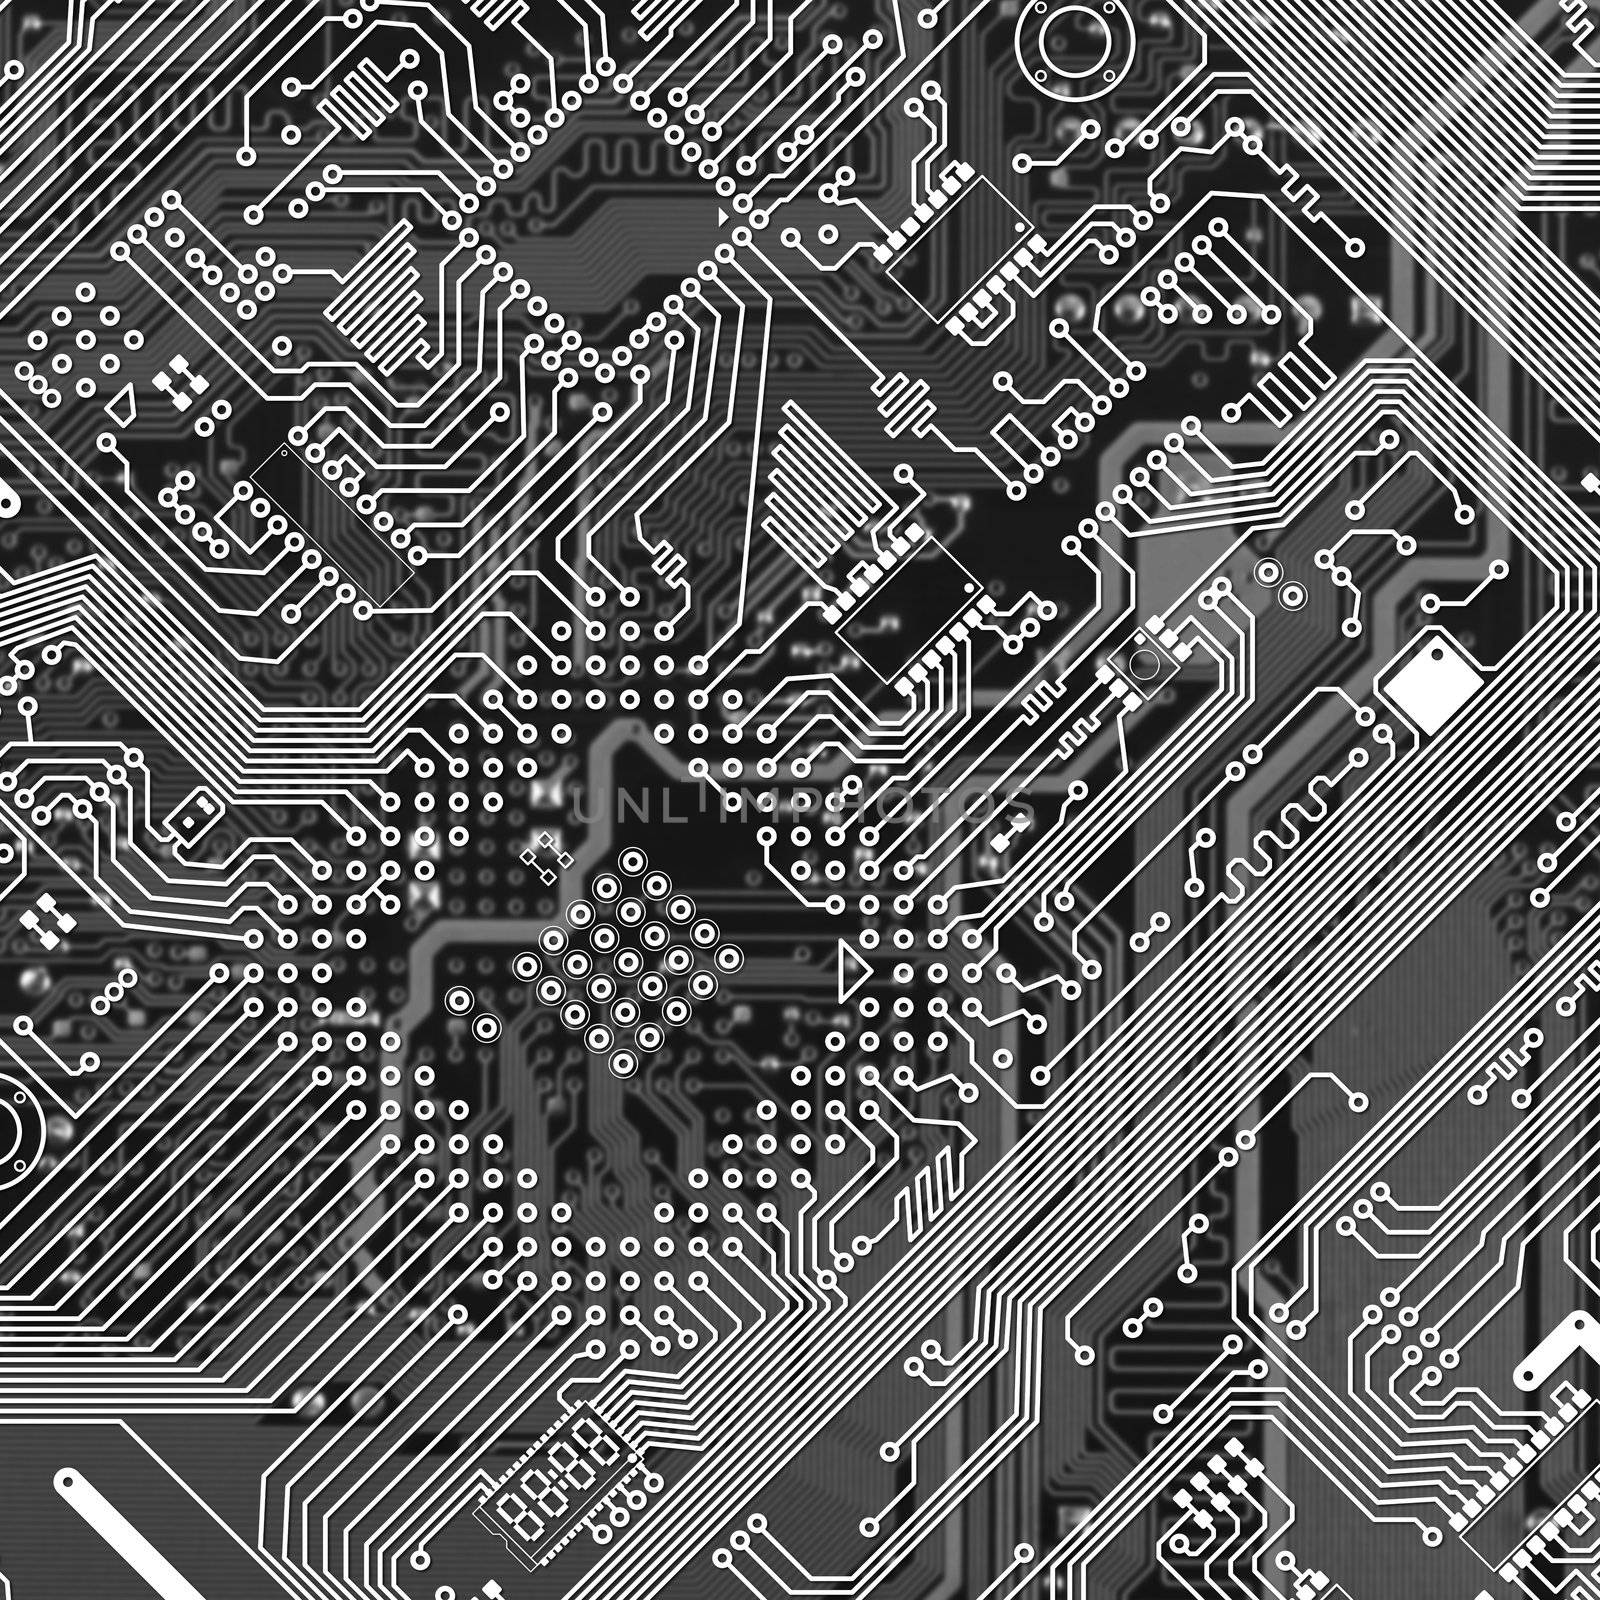 Printed monochrome industrial circuit board texture by pzaxe